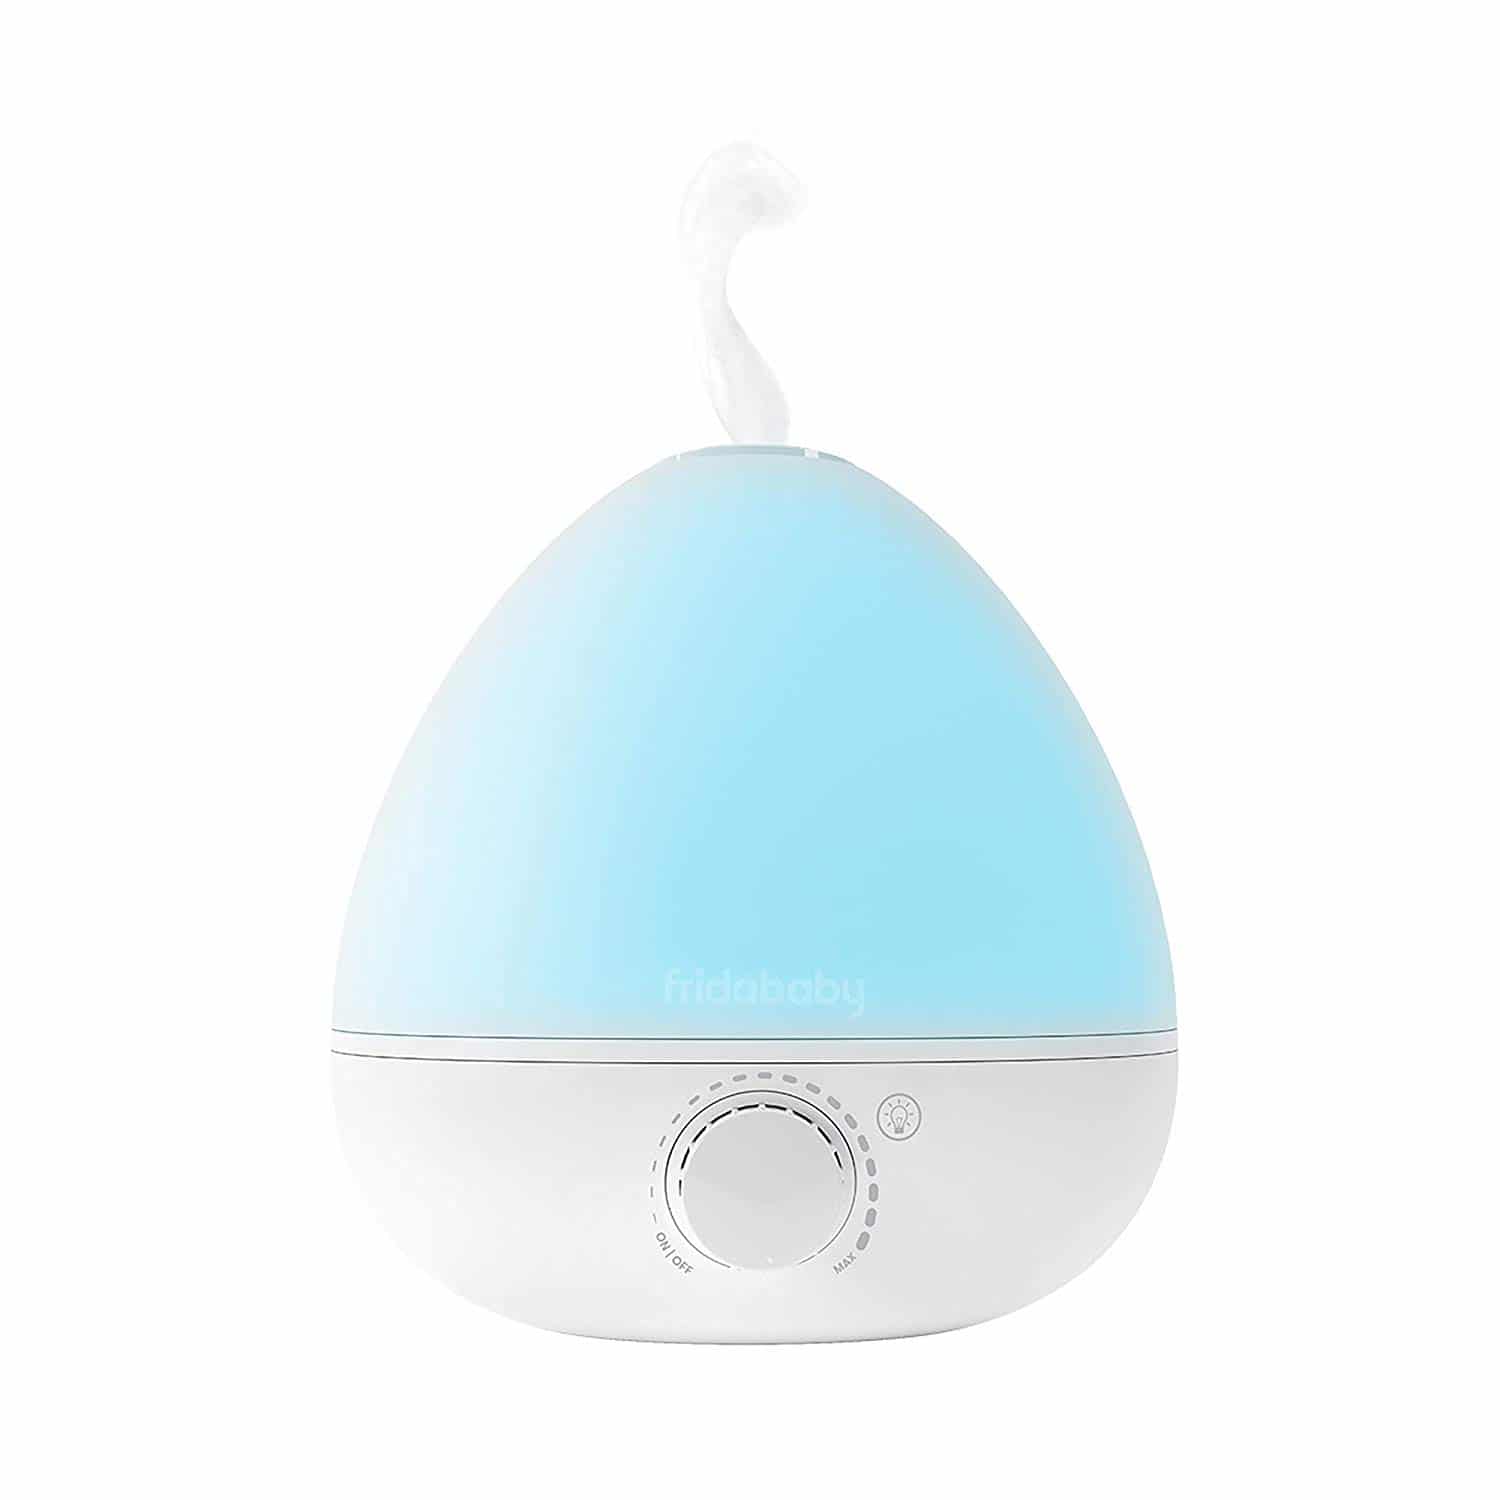 FridaBaby 3-in-1 Humidifier